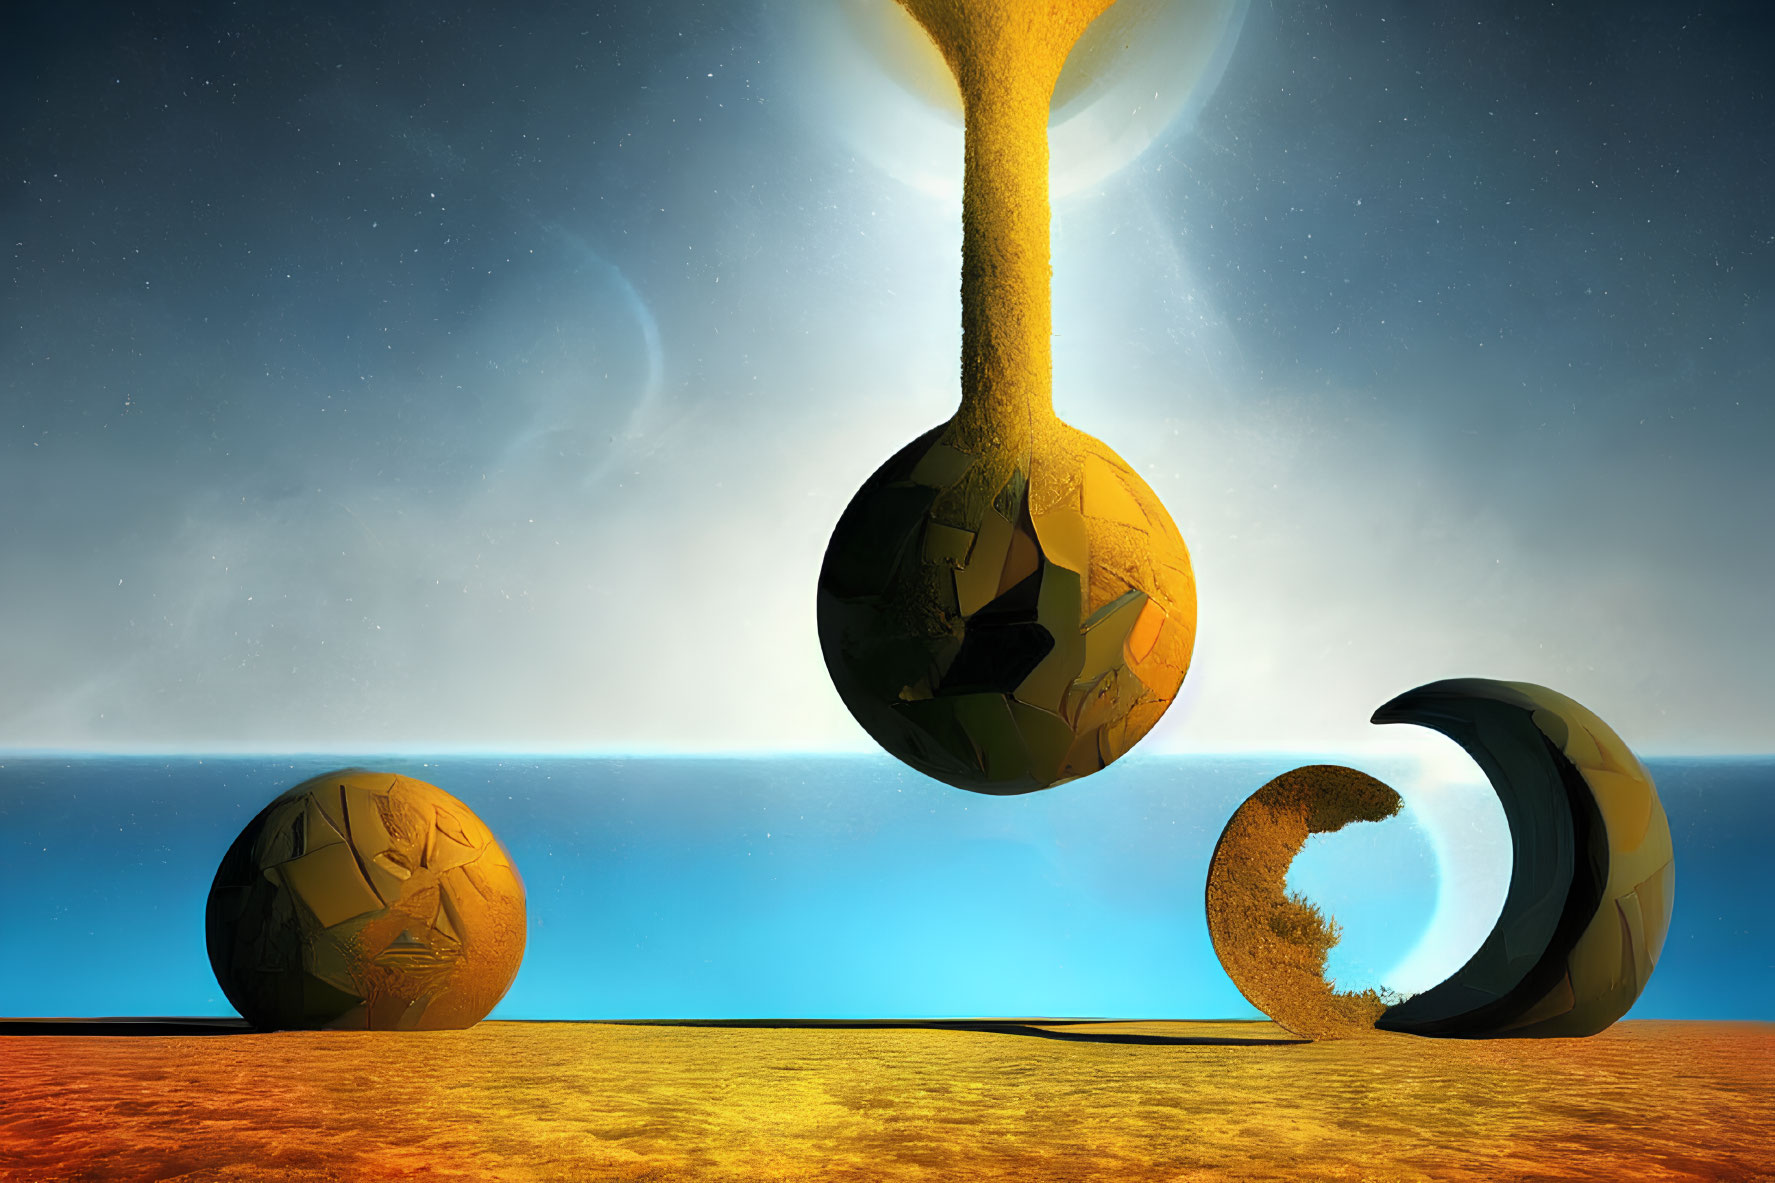 Surreal landscape with cracked spheres and floating hourglass